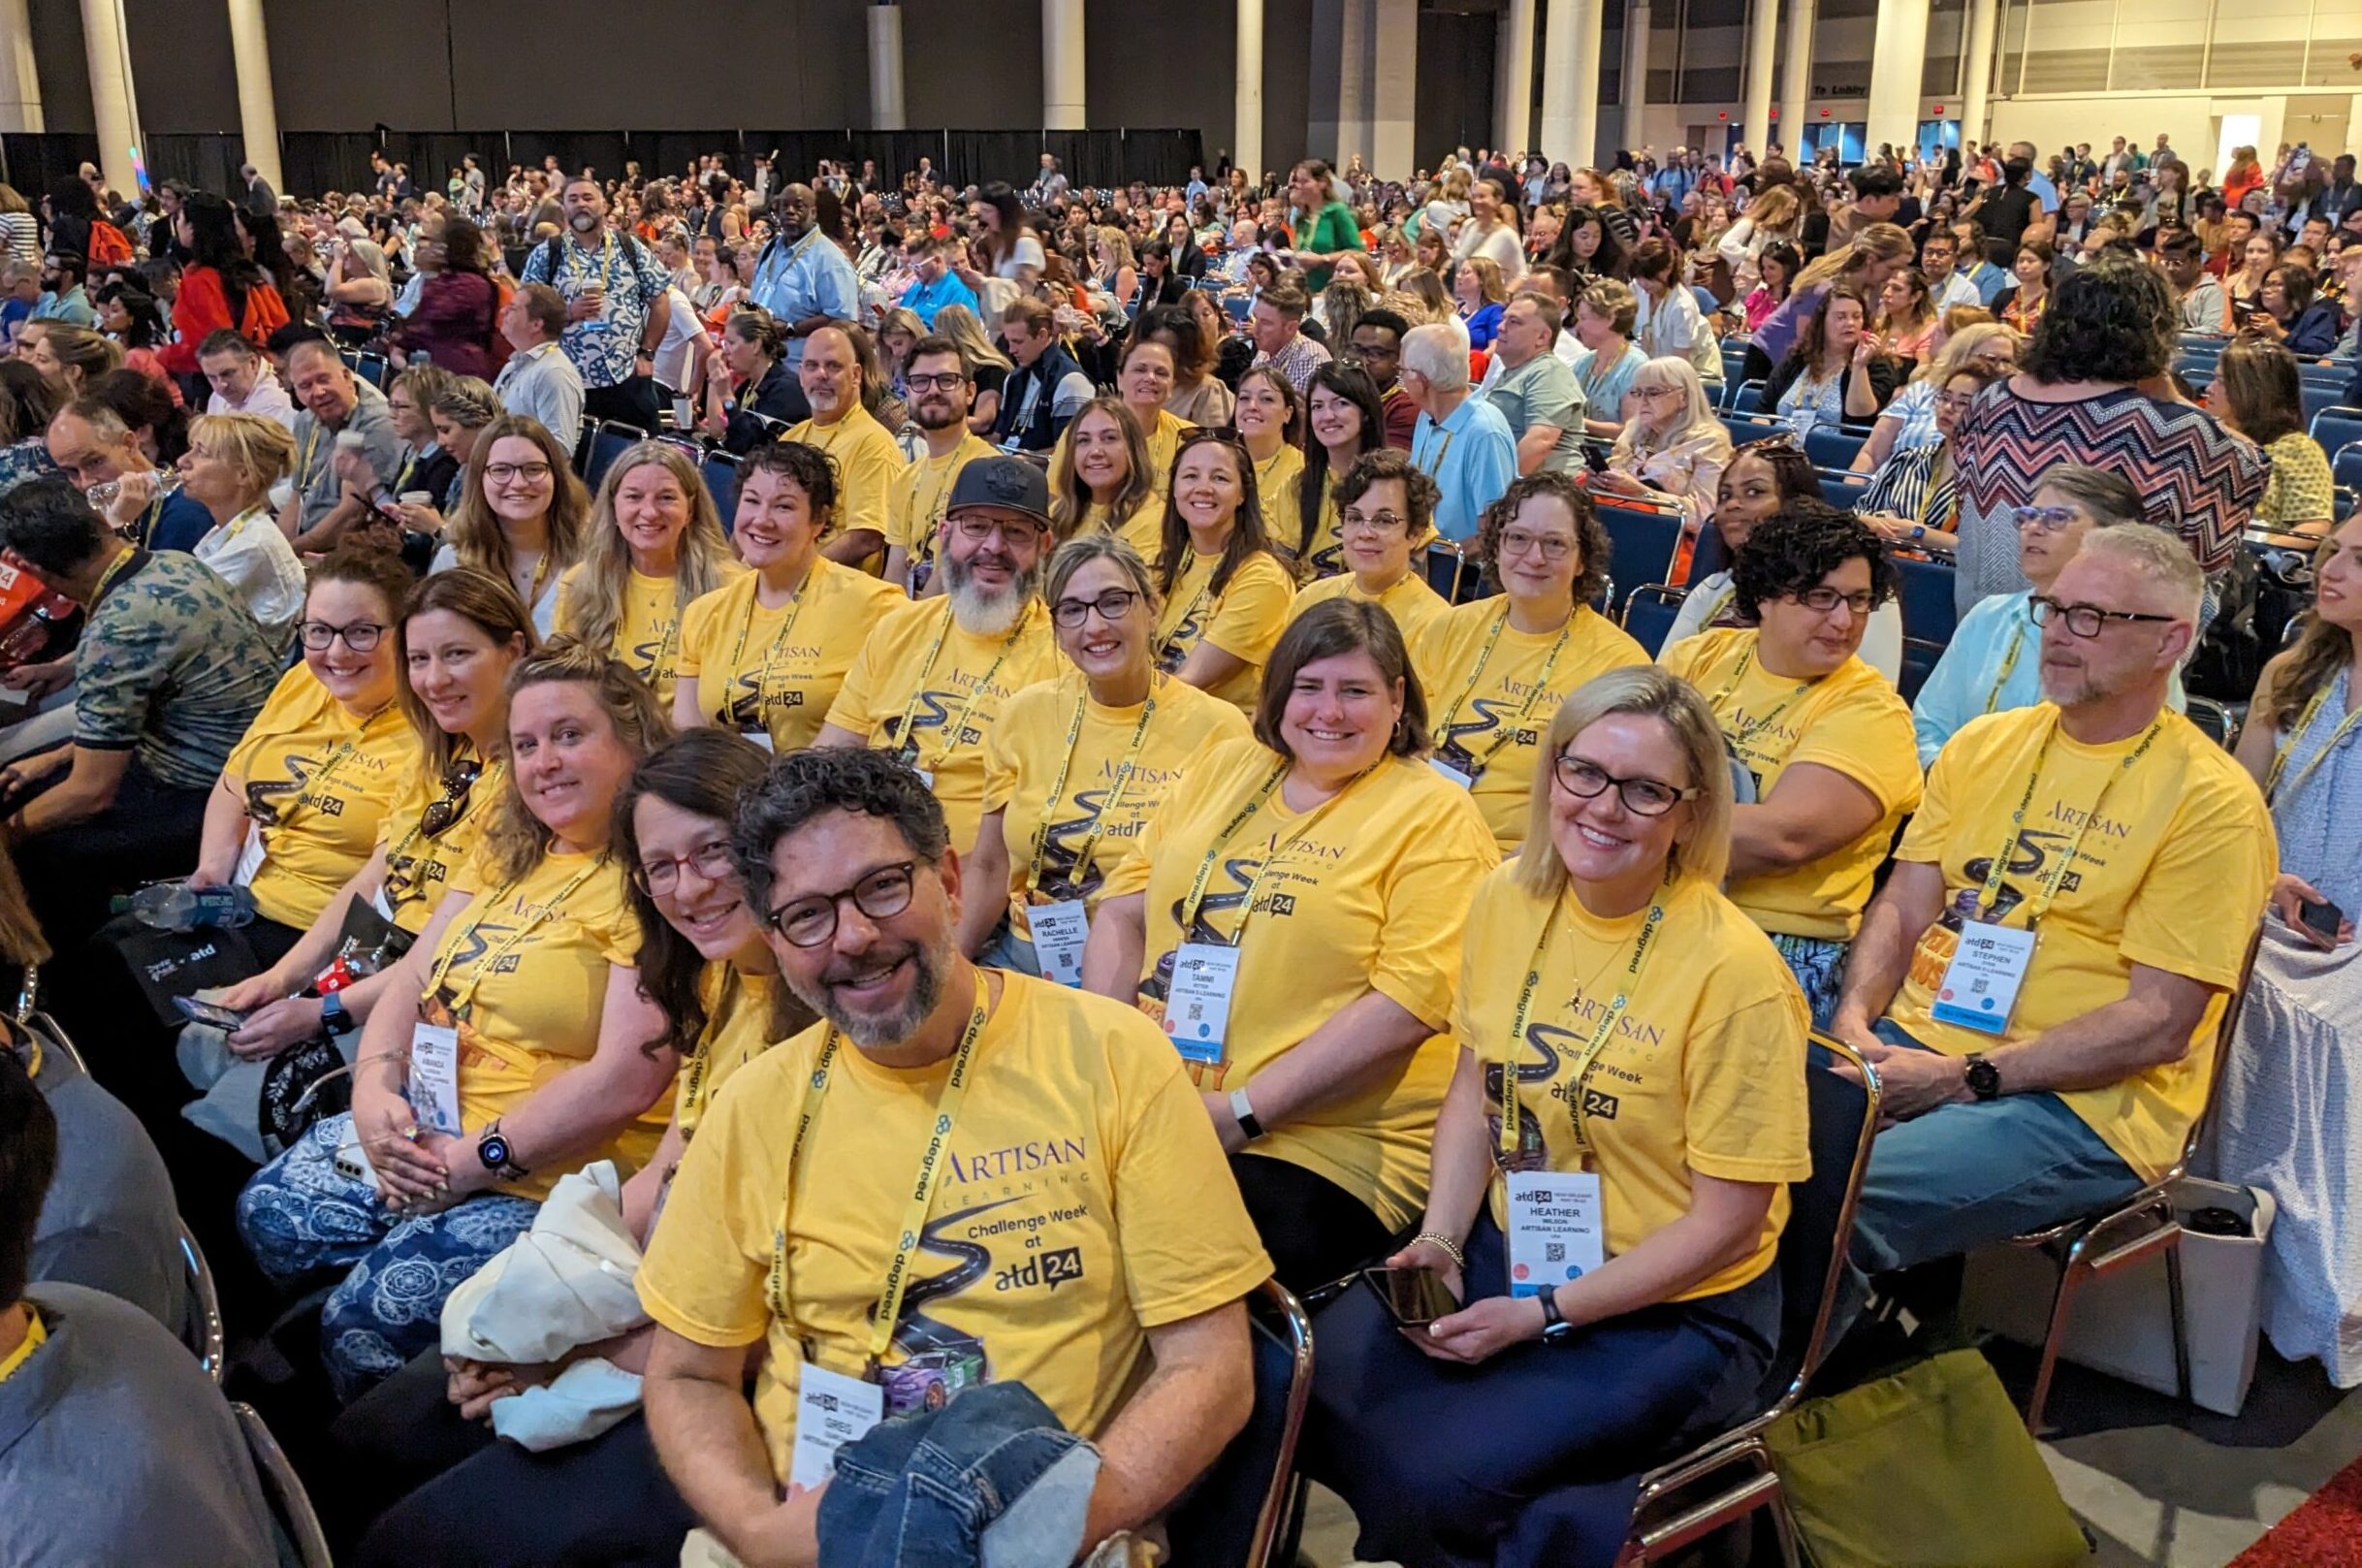 Artisan Learning team members in matching yellow shirts are seated together at a conference.